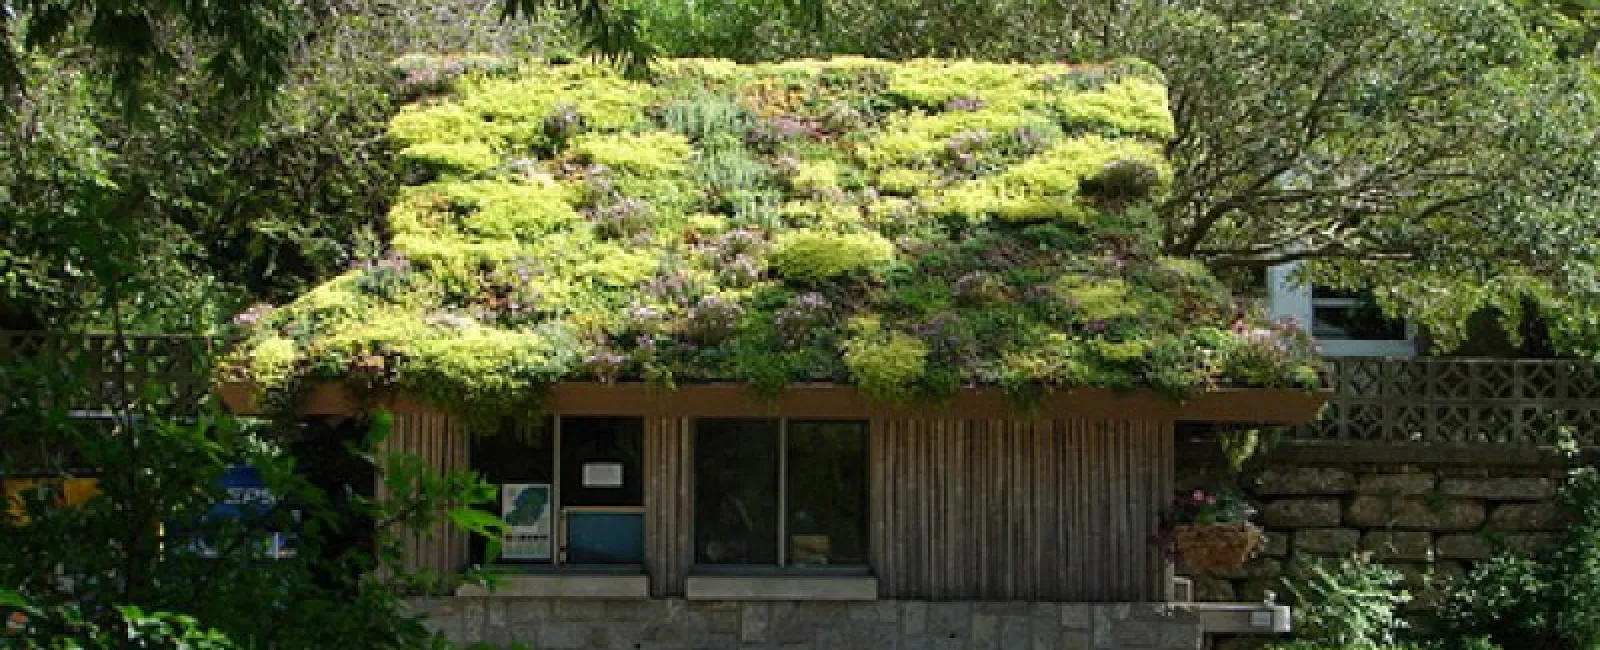 Green roofs transform cityscape and countryside